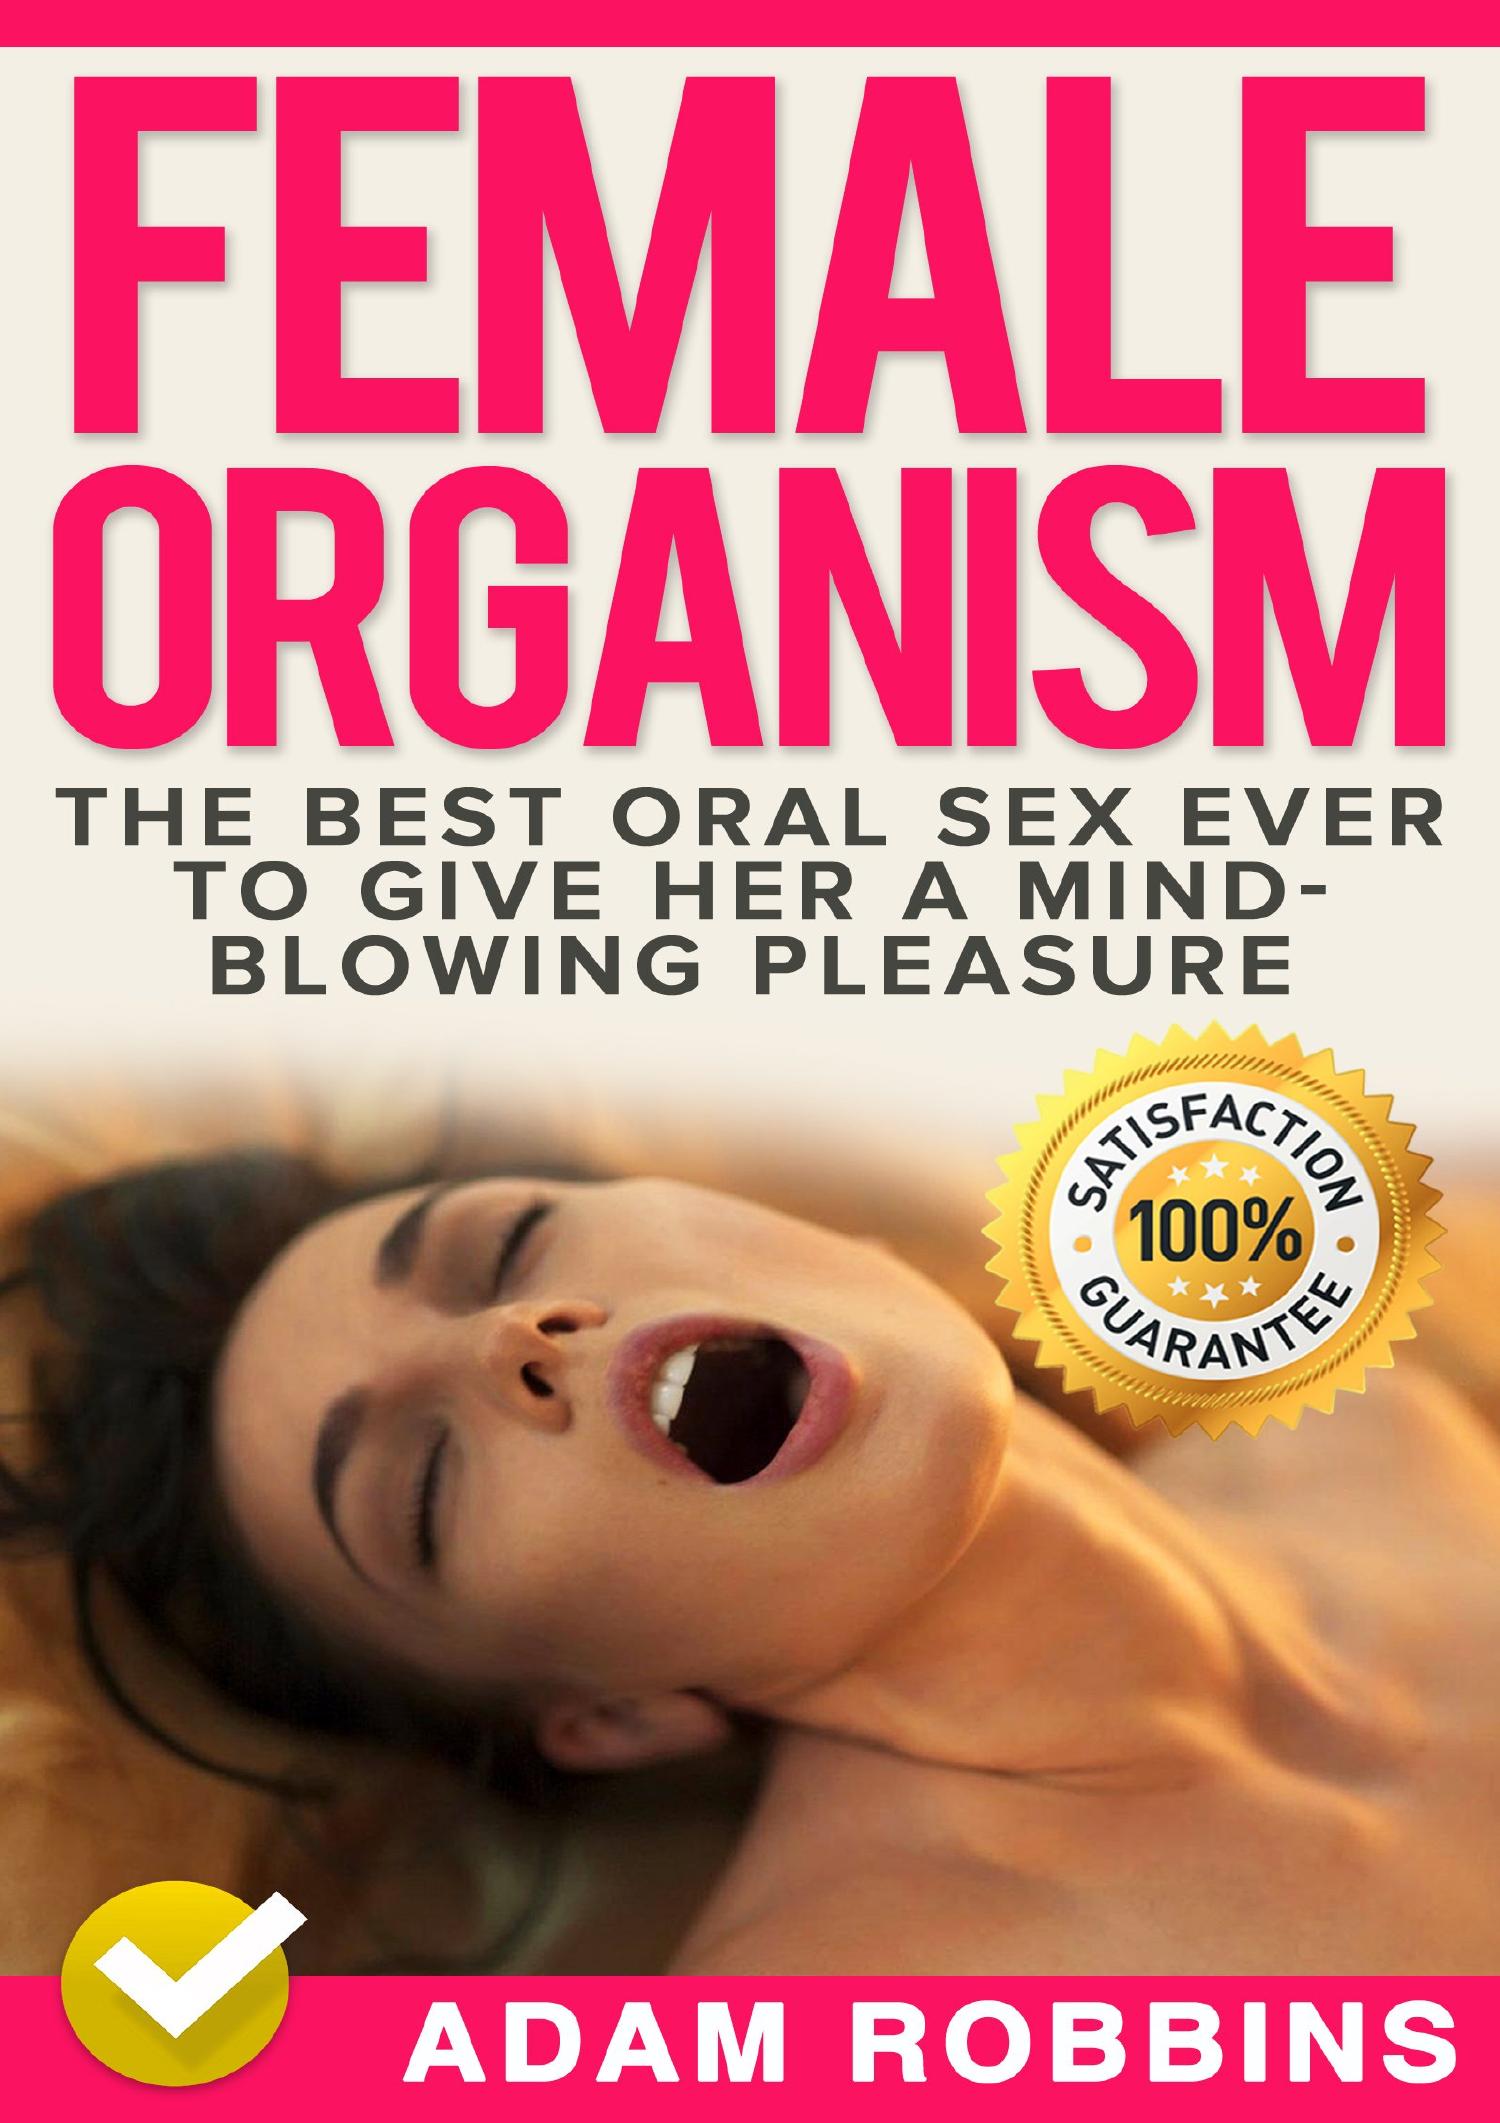 How To Give A Woman Oral Sex